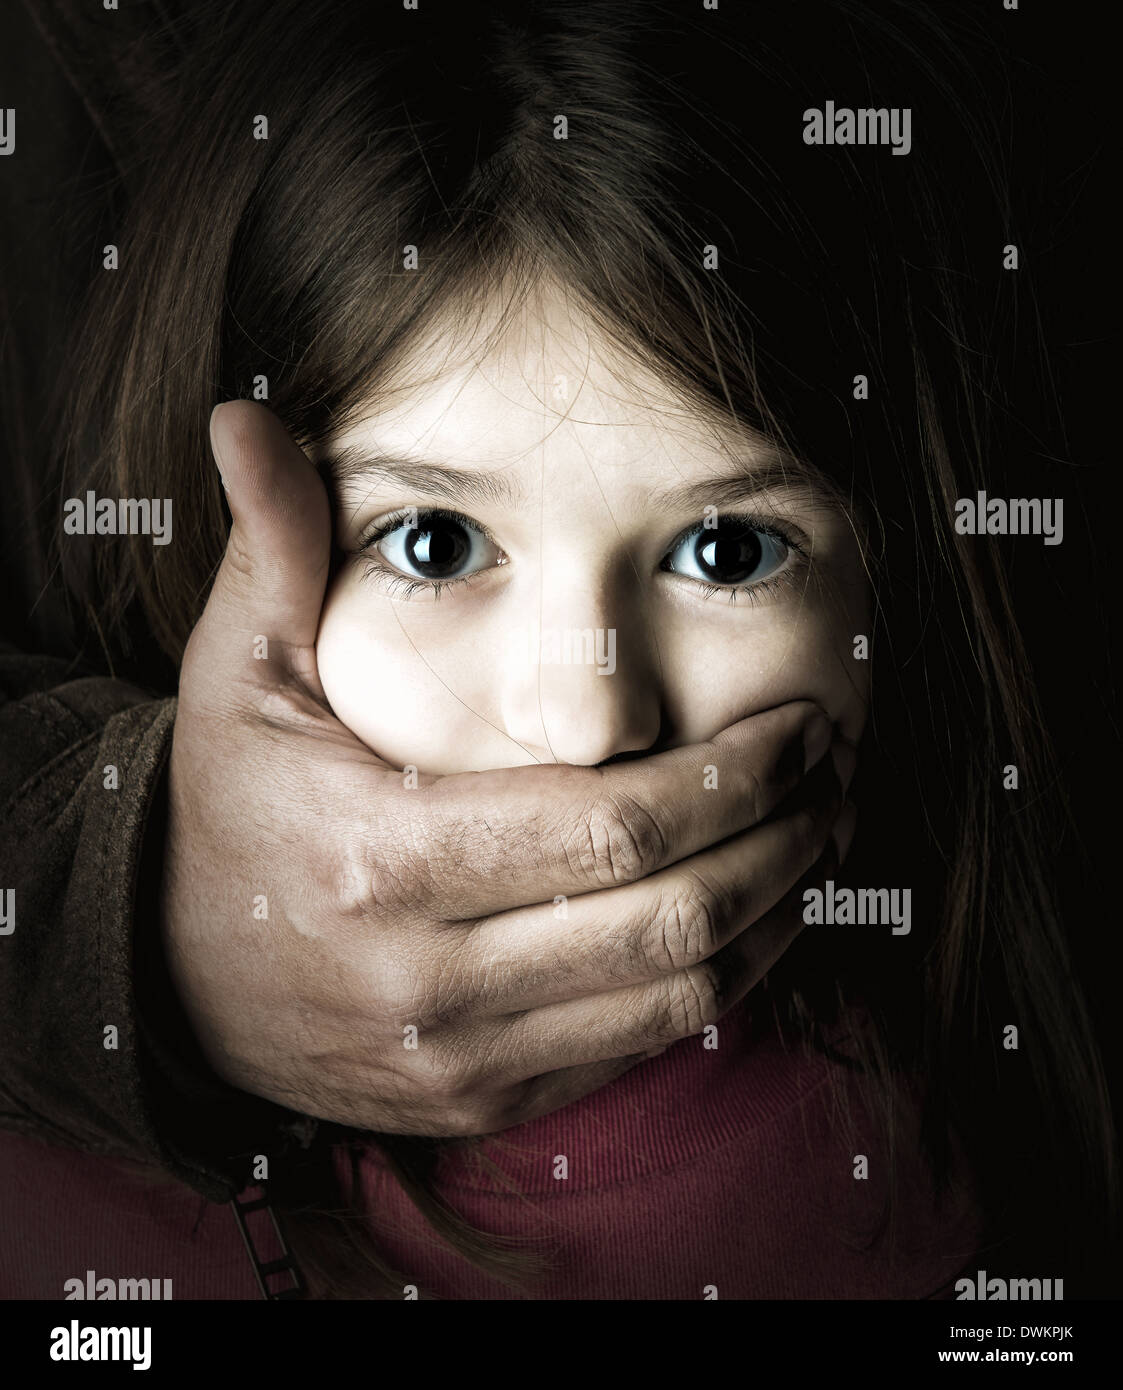 Sketch of scared girl with hand covers her mouth, Stock Illustration by  ©vvoennyy #267632918